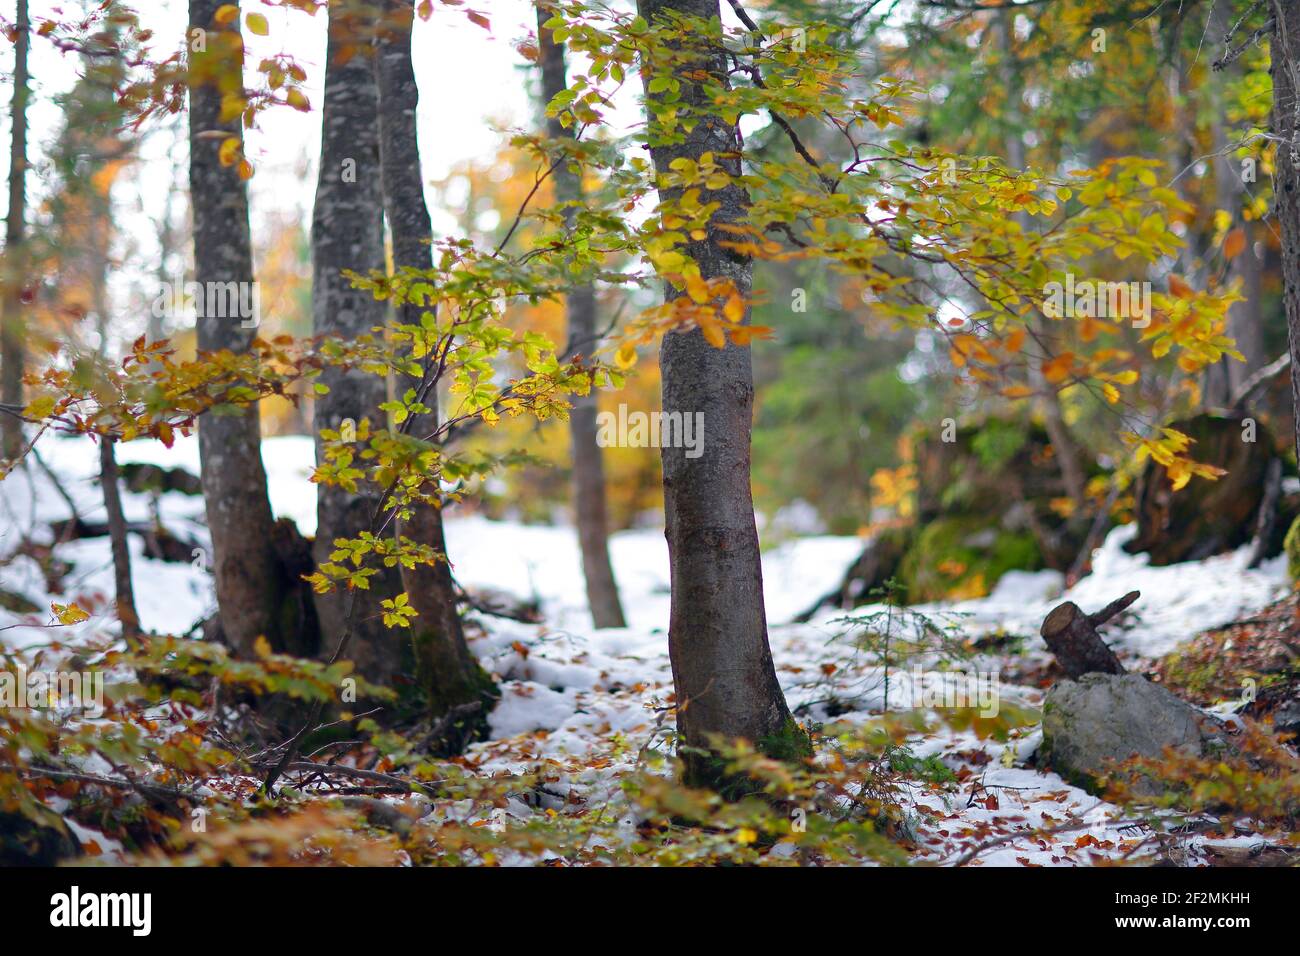 Deciduous forest in autumn after snowfall in landscape format, Stock Photo